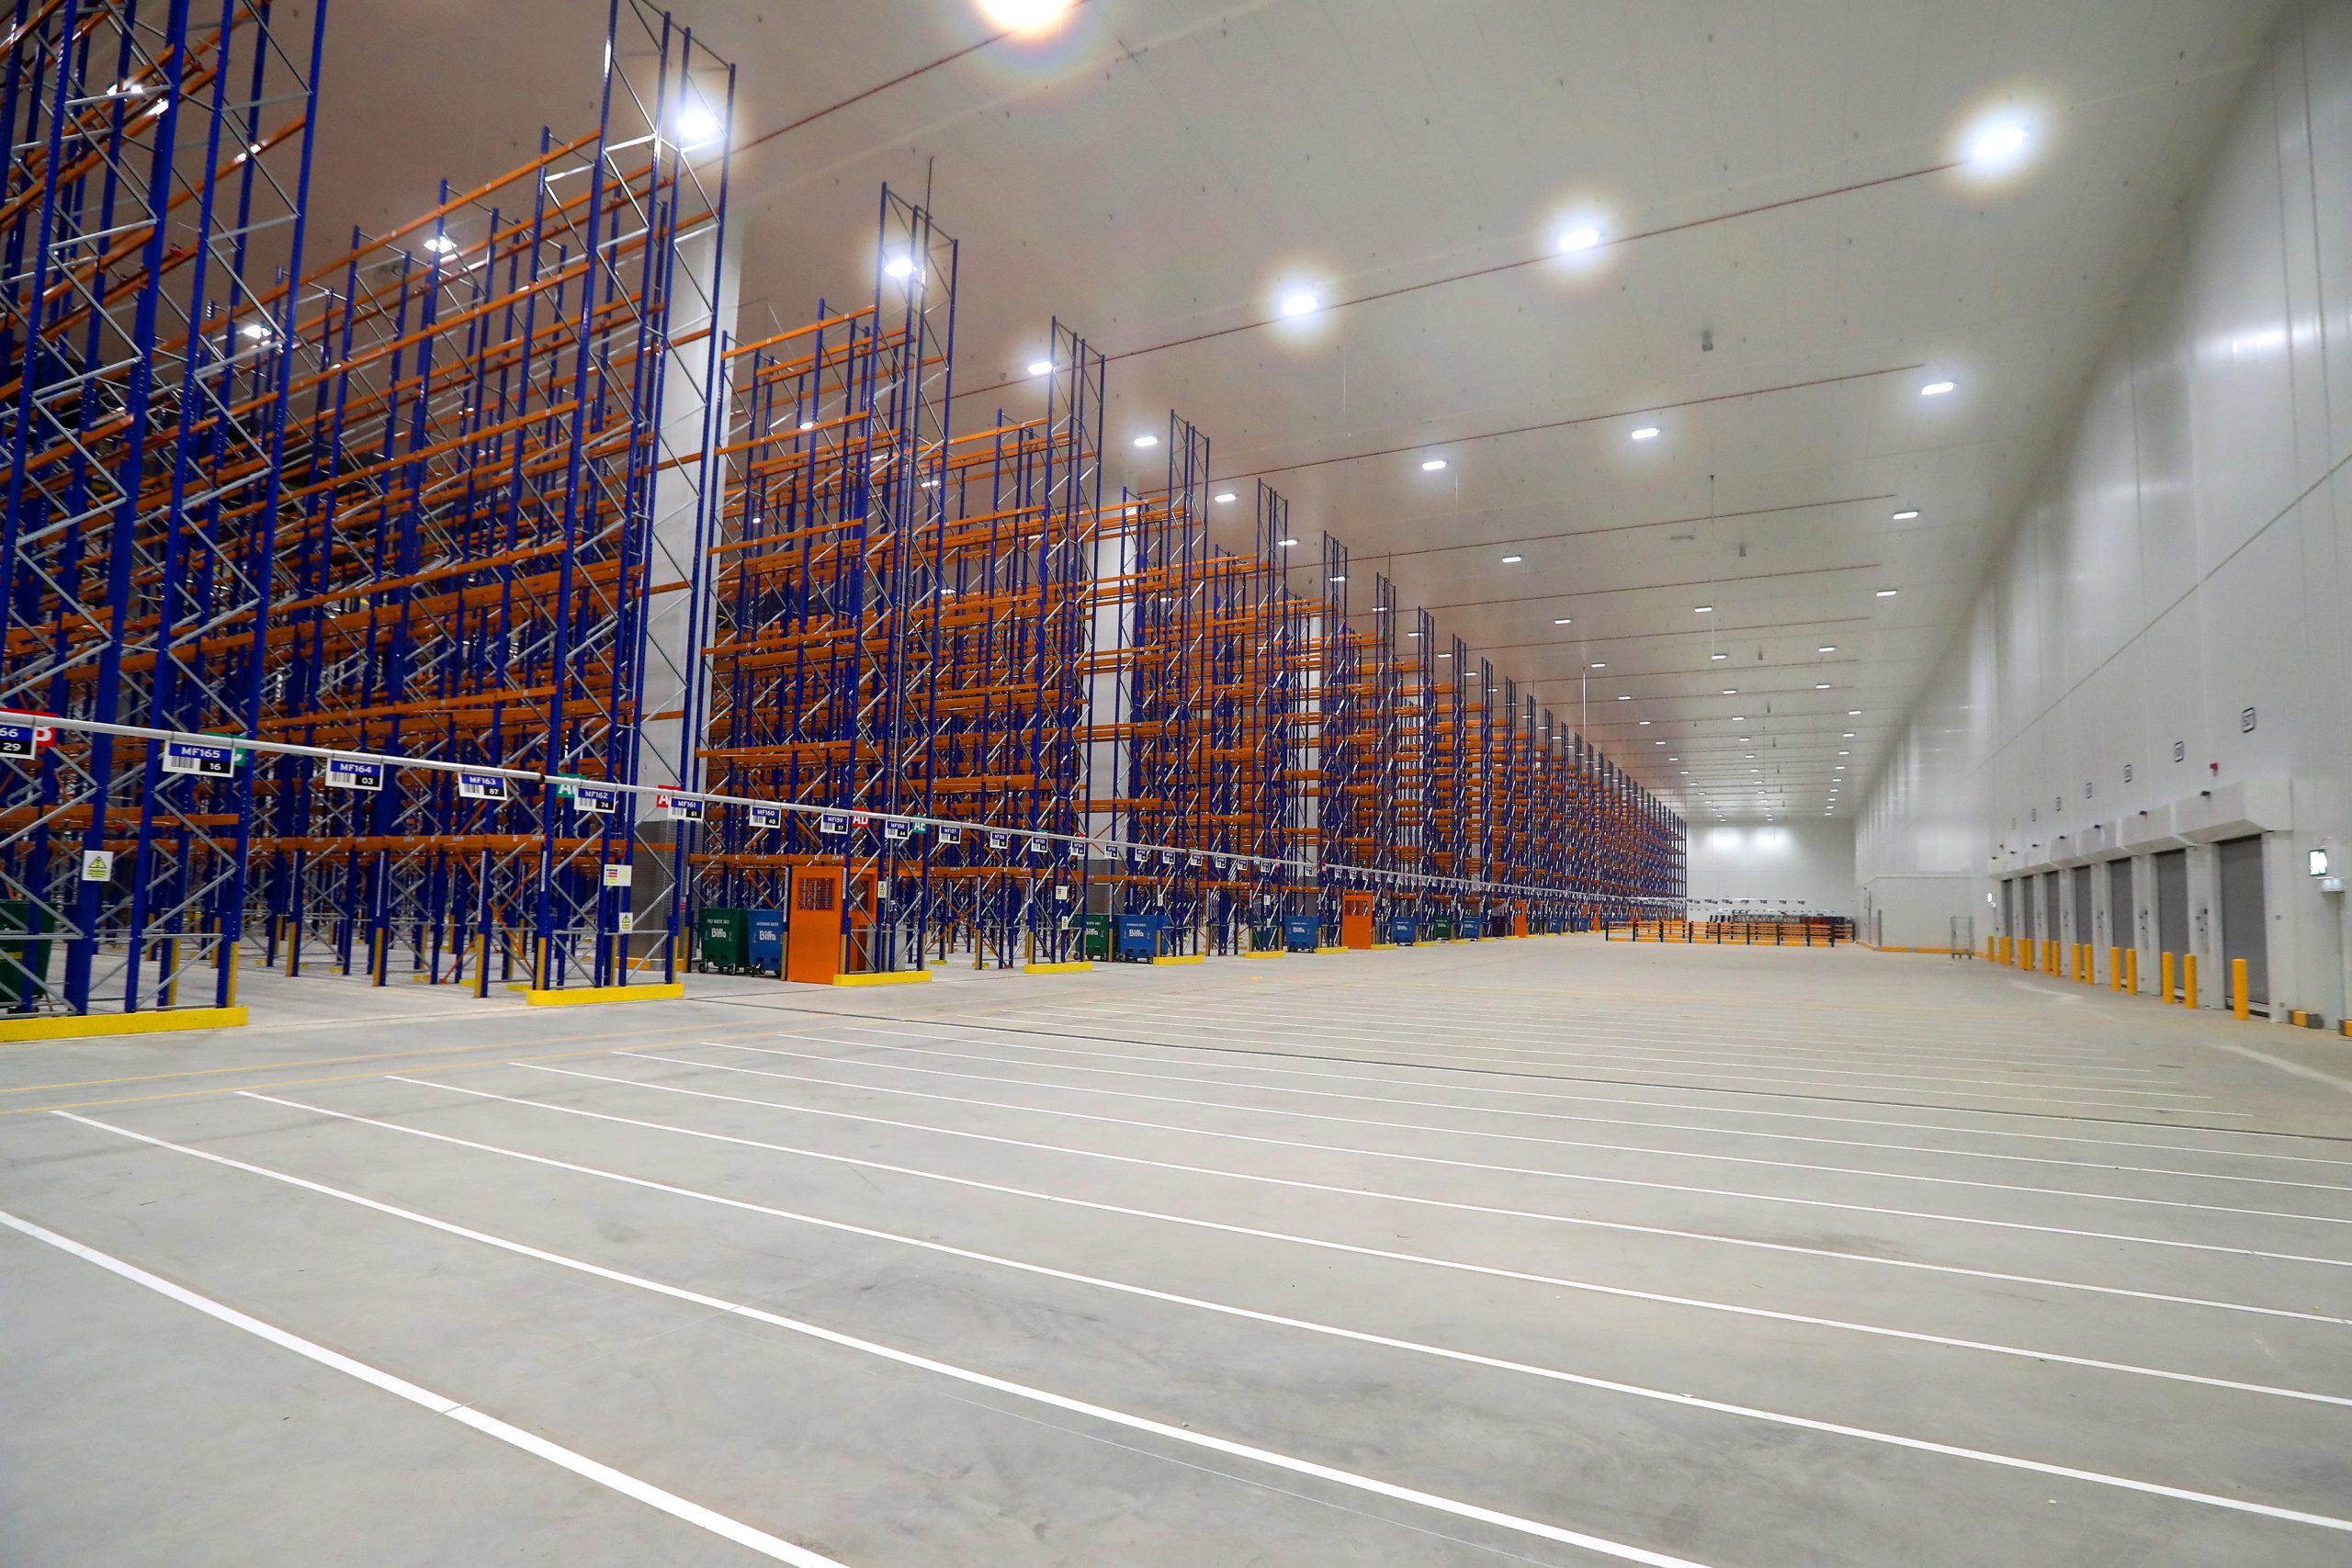 SAINSBURYS PINEHAM FROZEN NATIONAL DISTRIBUTION CENTRE - BASE BUILD
Pictures by Adam Fradgley
Pictured at GV / General View of Freezer racking
Distribution Centre featuring a 2.7KM2 -25c freezer - built by Base Build Services